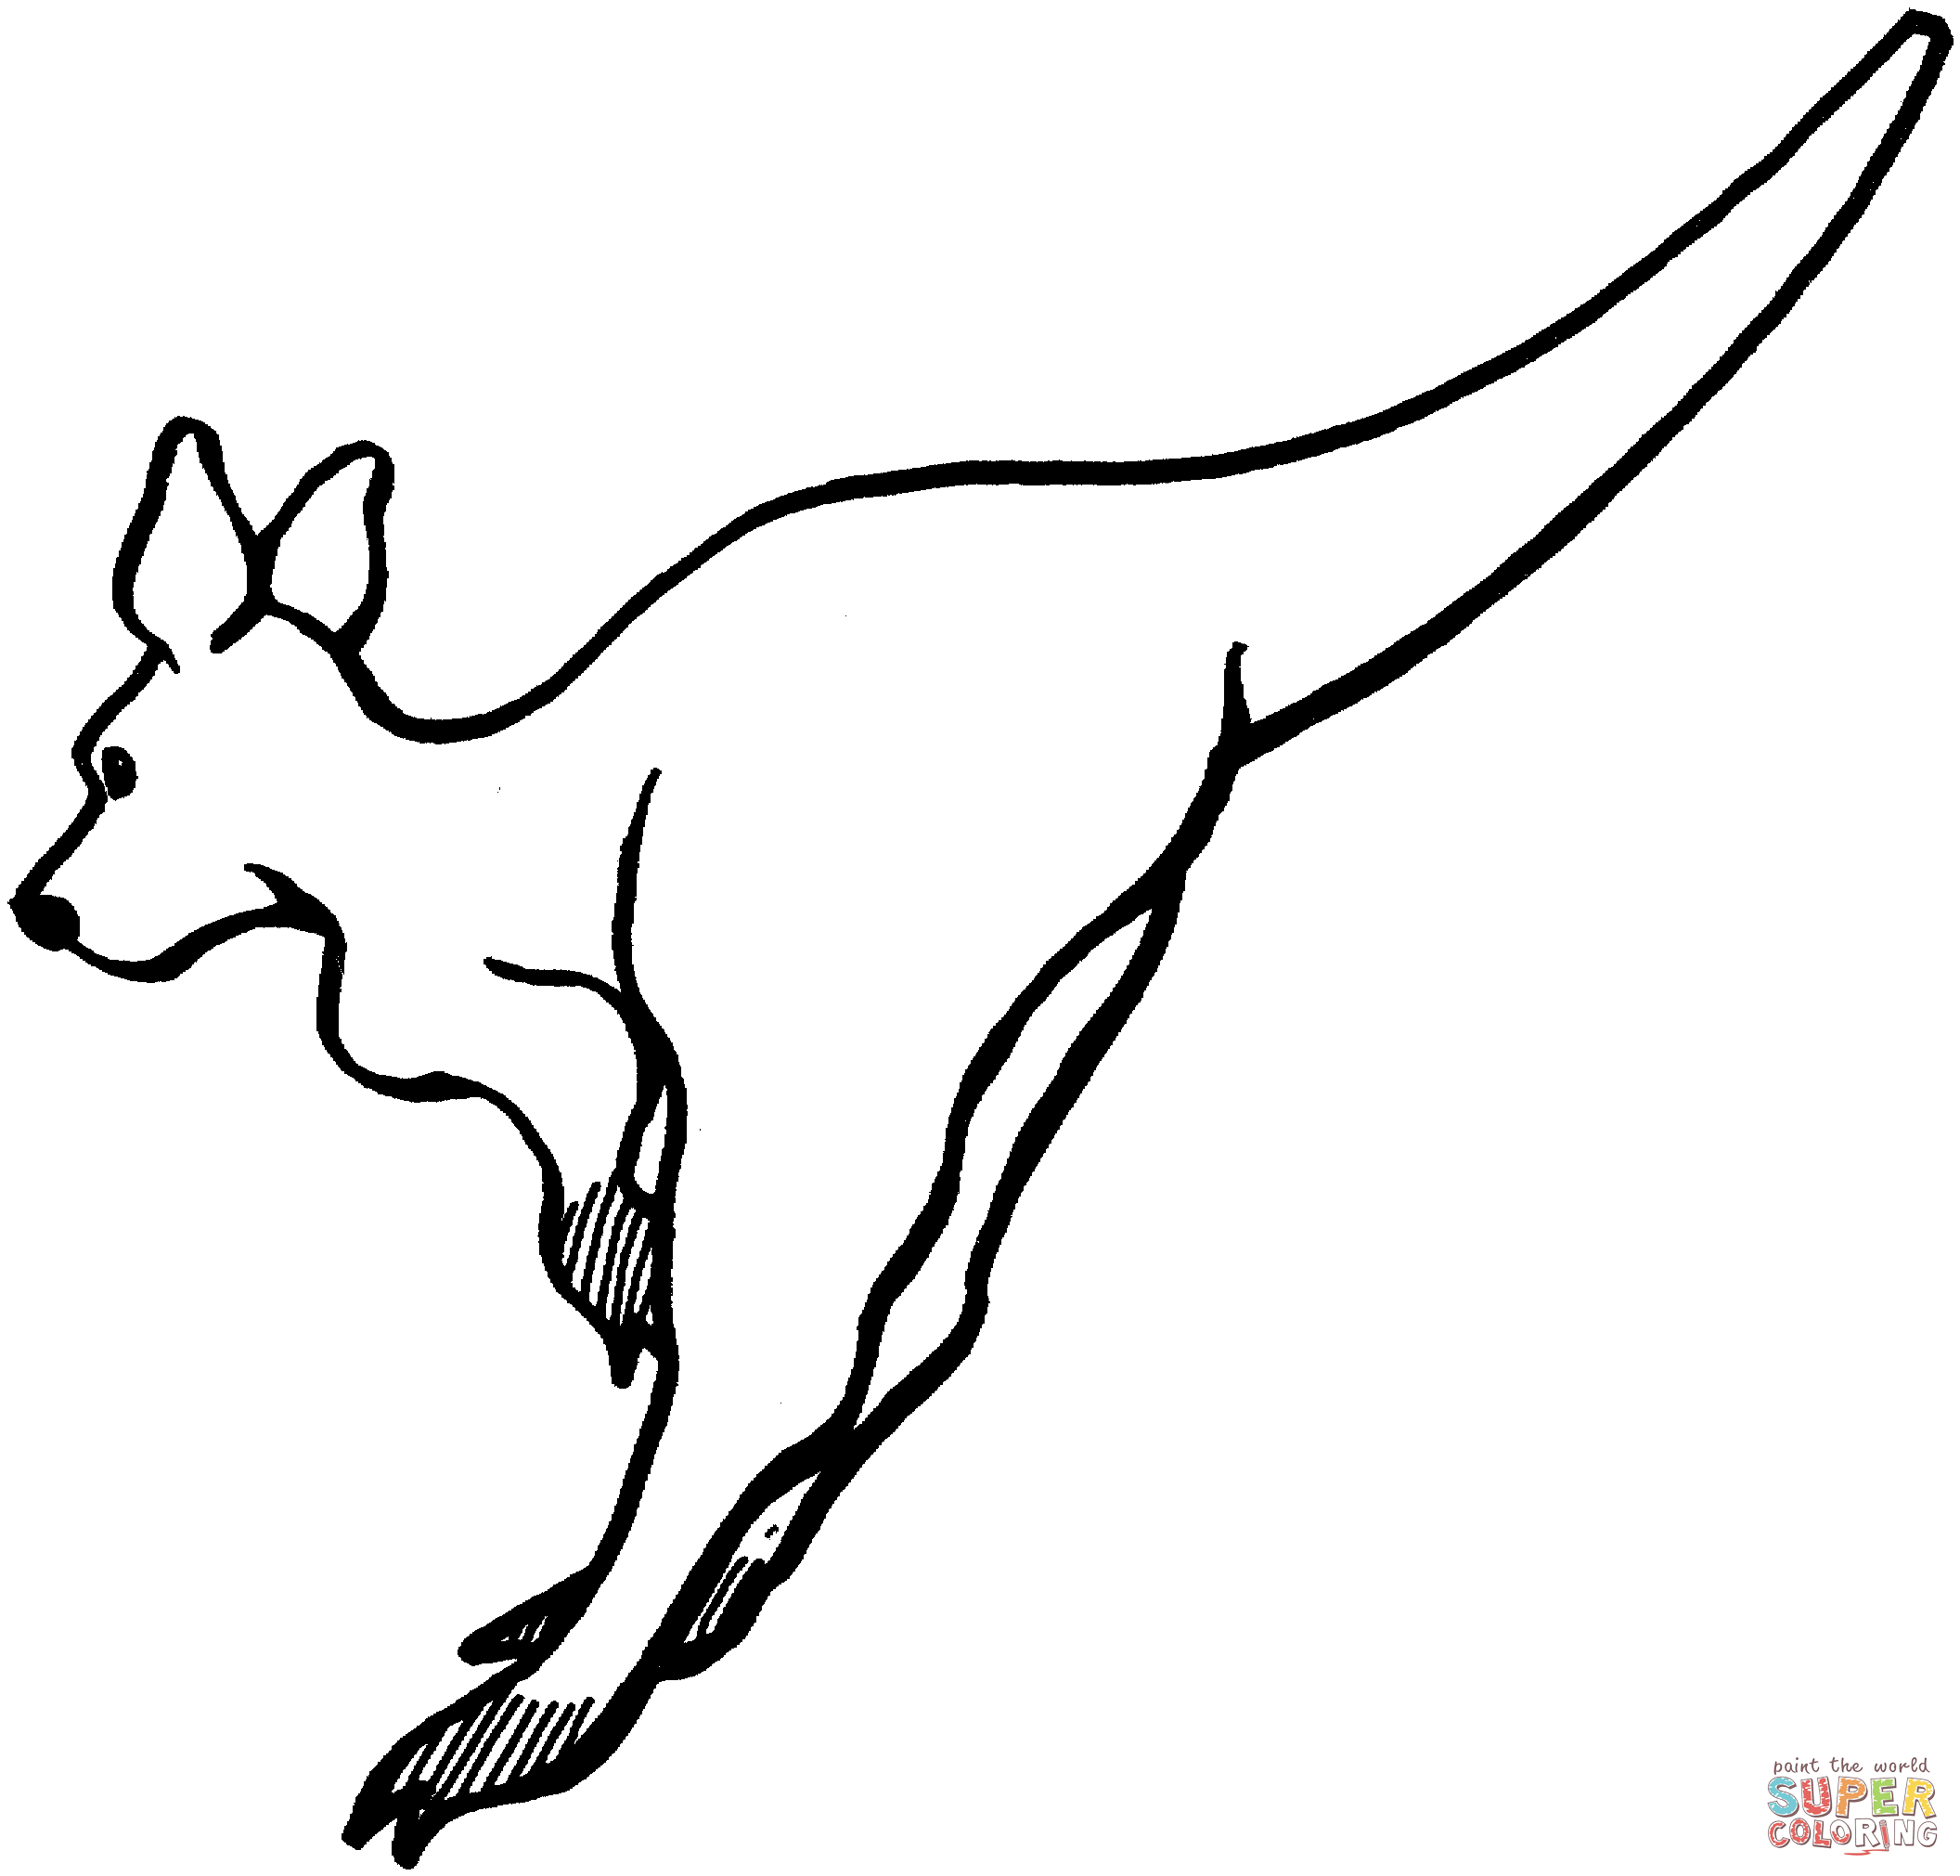 Kangaroos coloring pages | Free Coloring Pages